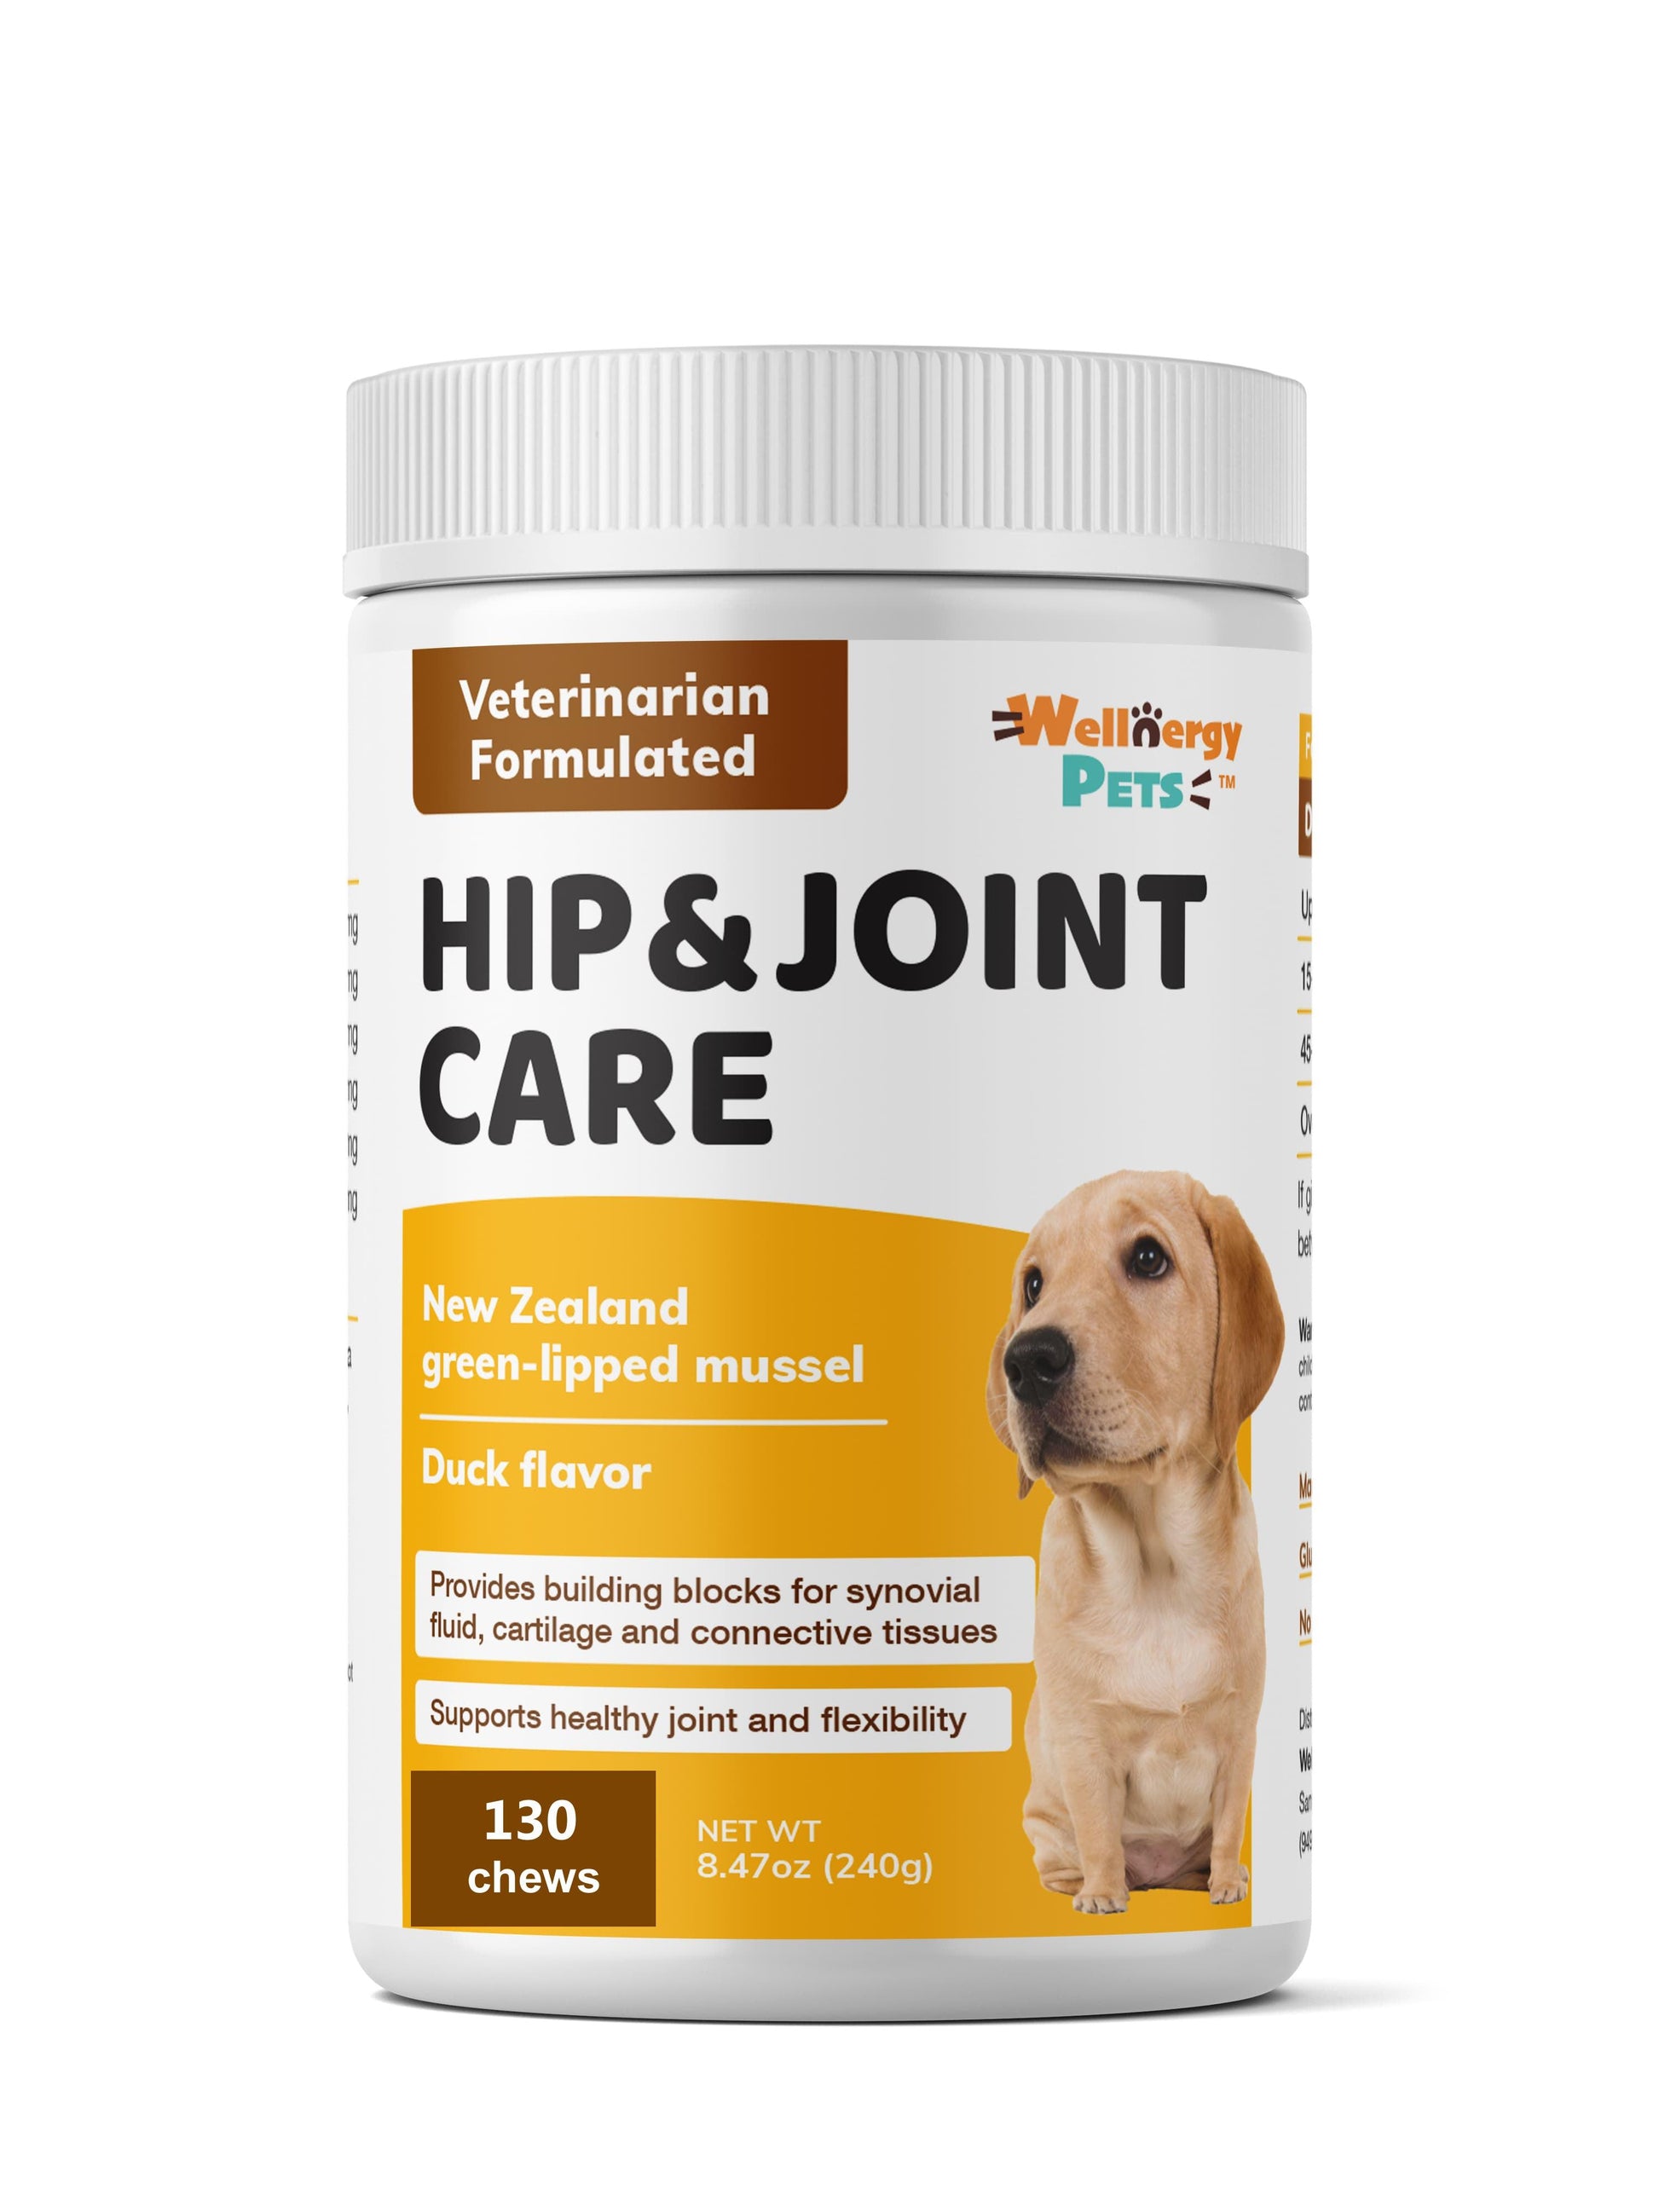 HIP & JOINT CARE<br>hip and joint supplement for dogs Wellnergy Pets